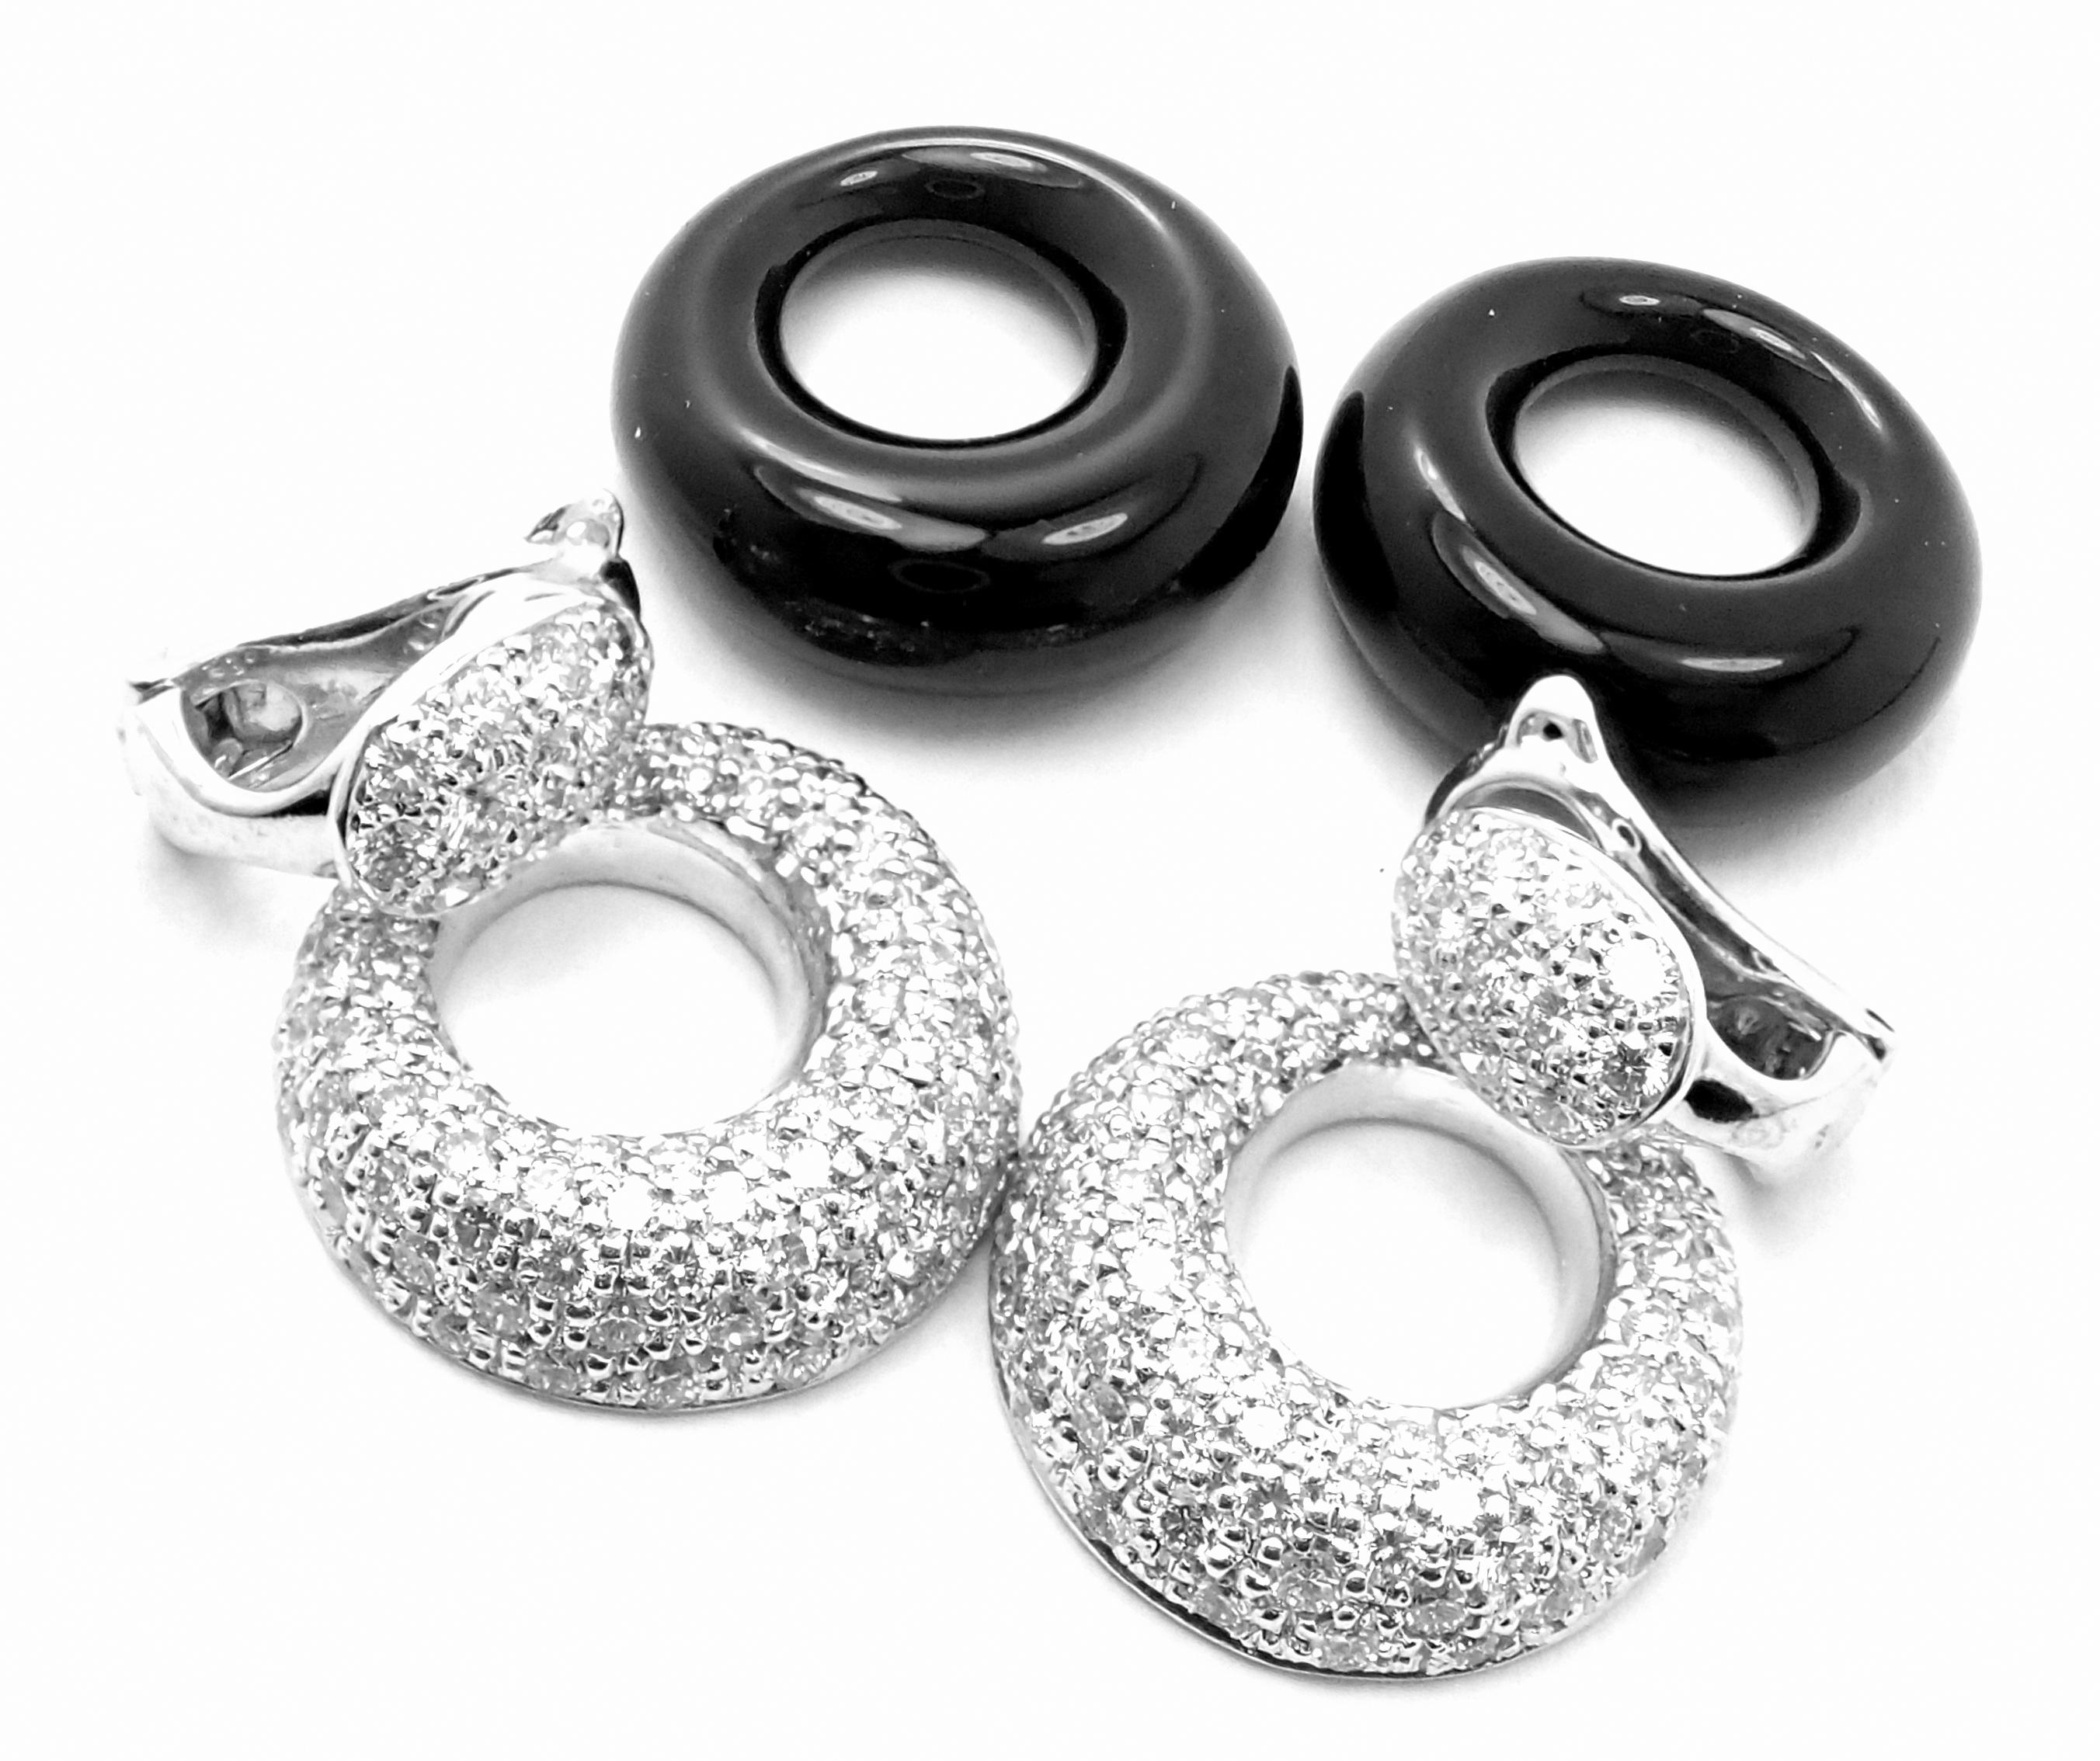 18k White Gold Vintage Diamond And Black Onyx Door Knocker Earrings by Van Cleef & Arpels. 
With round brilliant cut diamonds VVS1 clarity, E color total weight approximately 4ct
These earrings come with Van Cleef & Arpels box and a service paper